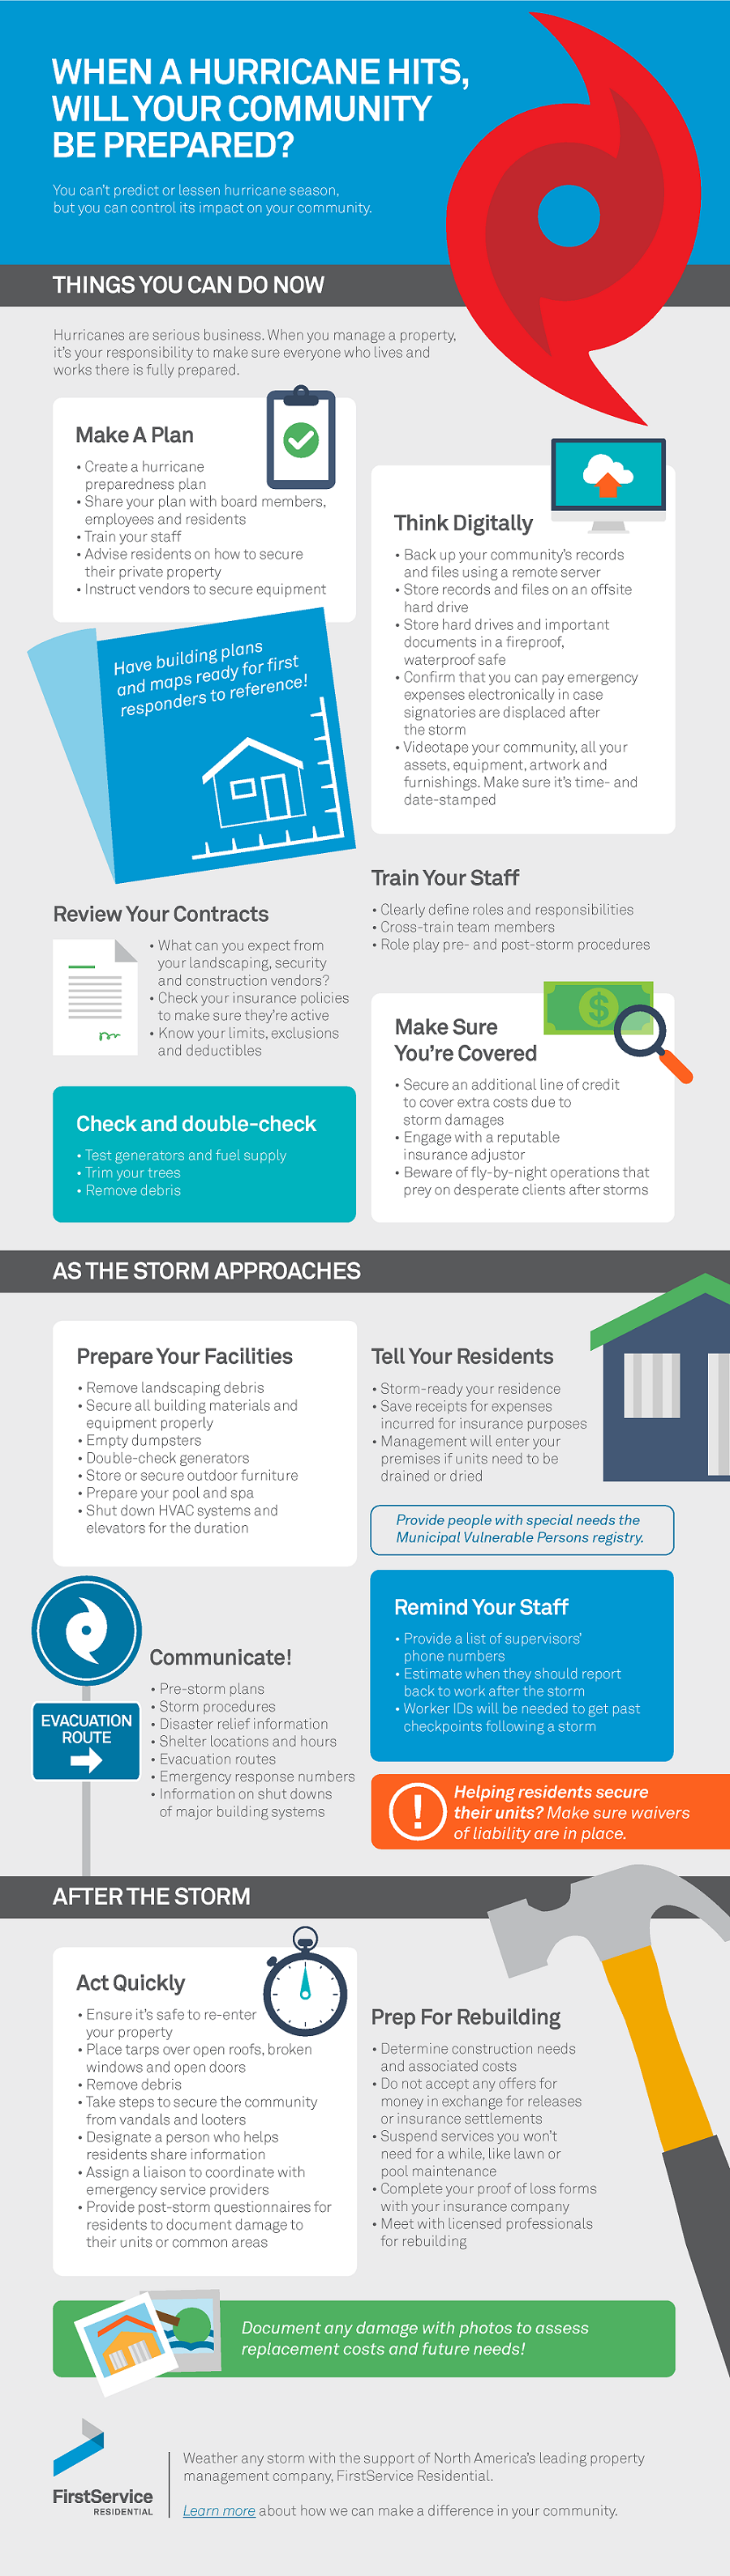 Hurricane Preparedness for Property and Business Owners